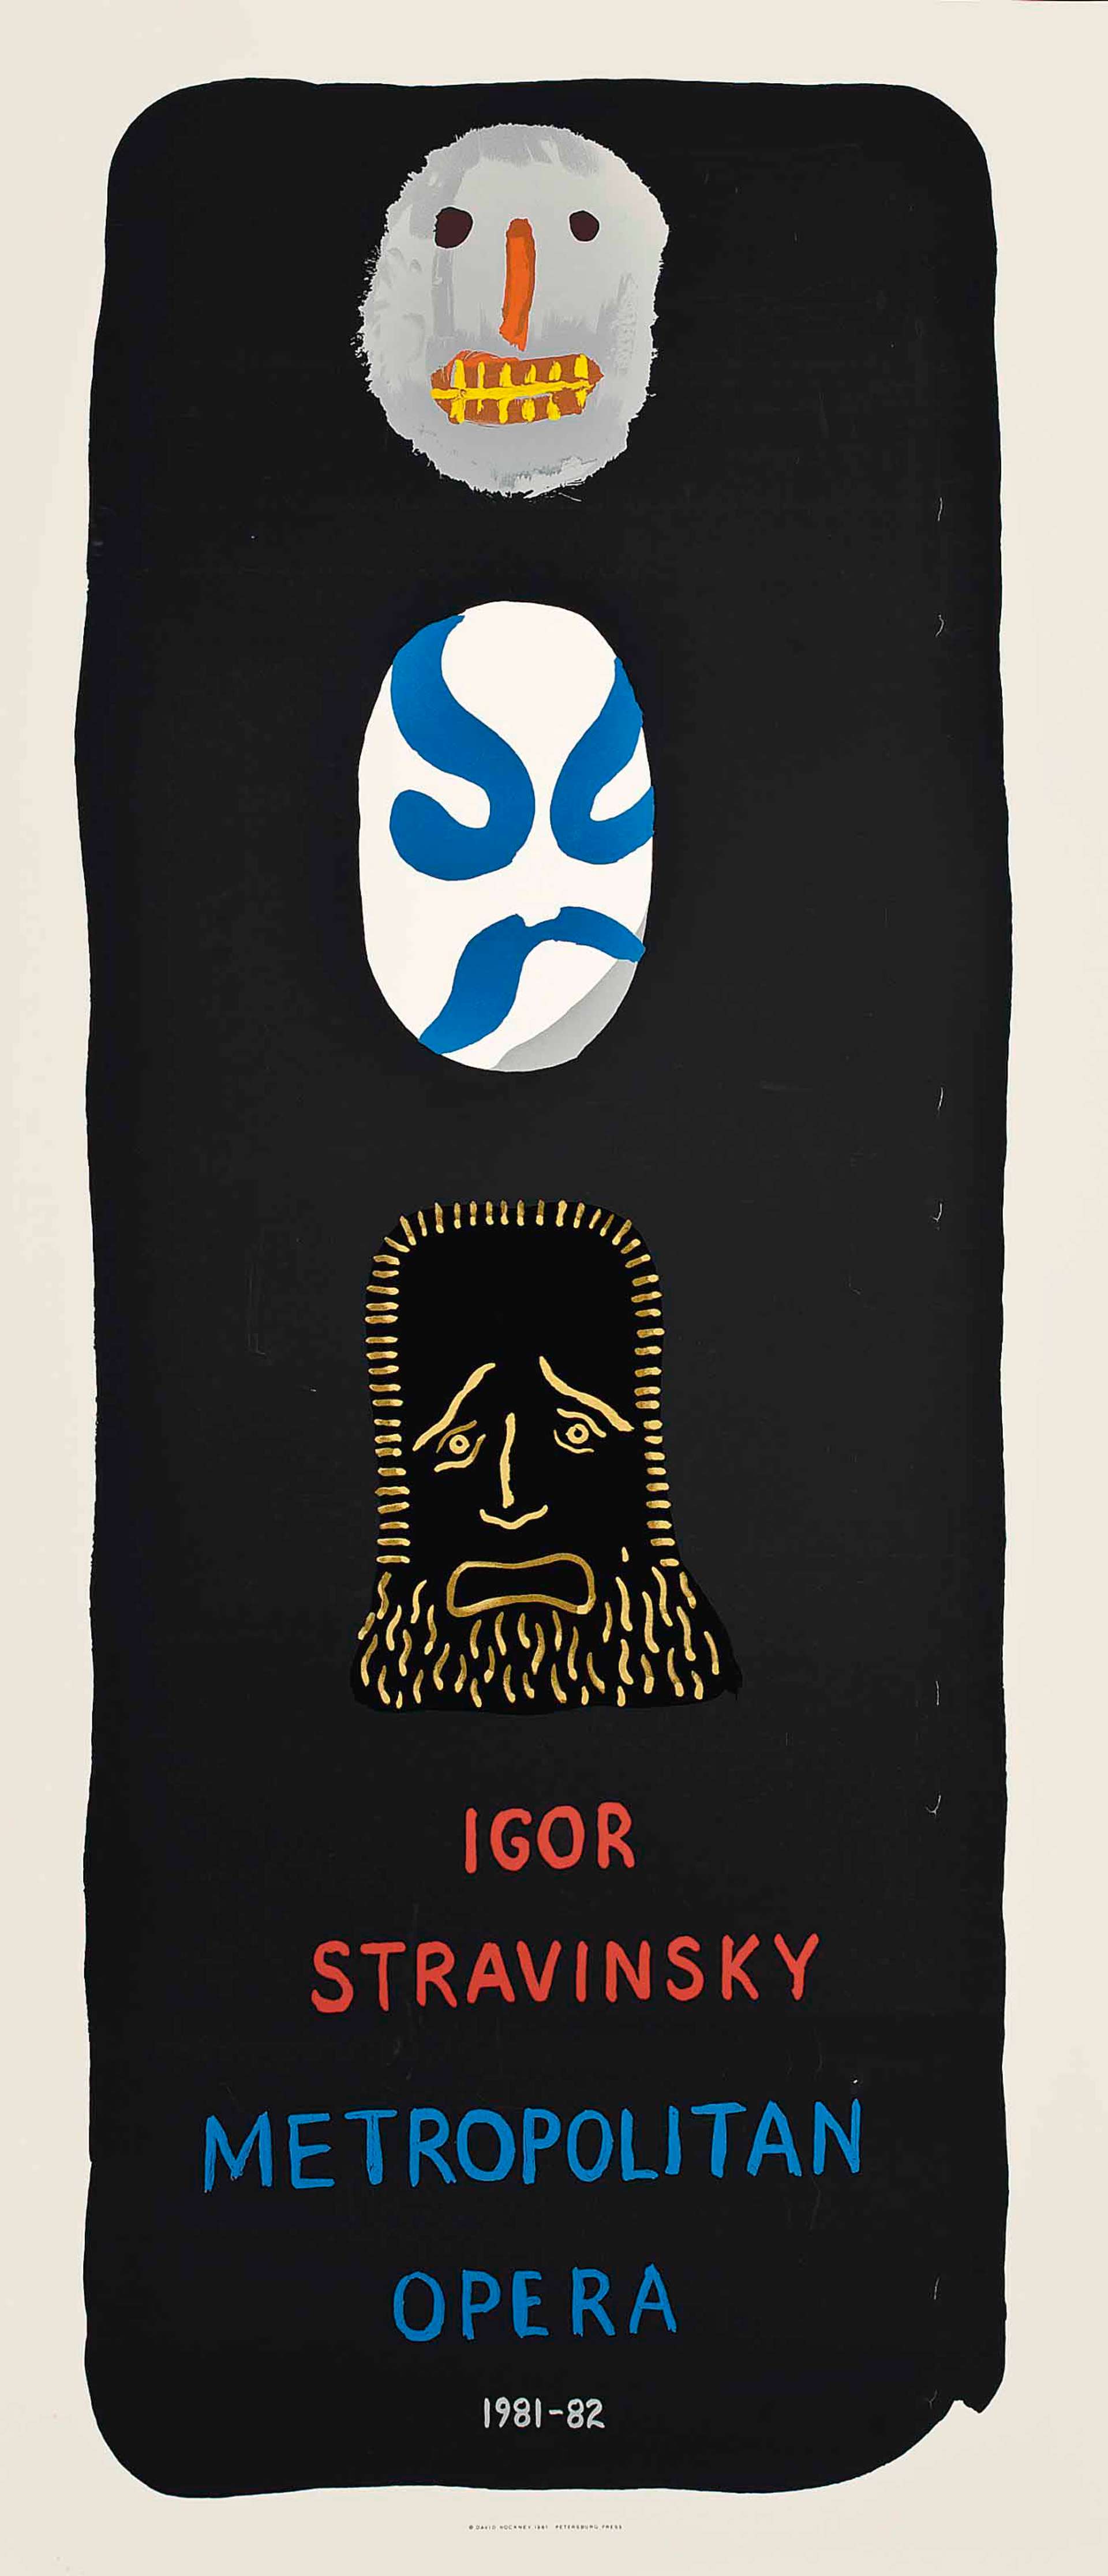 An image of the poster Hockney created for Igor Stravinsky at Metropolitan Opera. It shows a three faces against a black background, one a crudely drawn face, a mask and finally a sorrowful one. The title is written in block letters in bright yellow and blue.